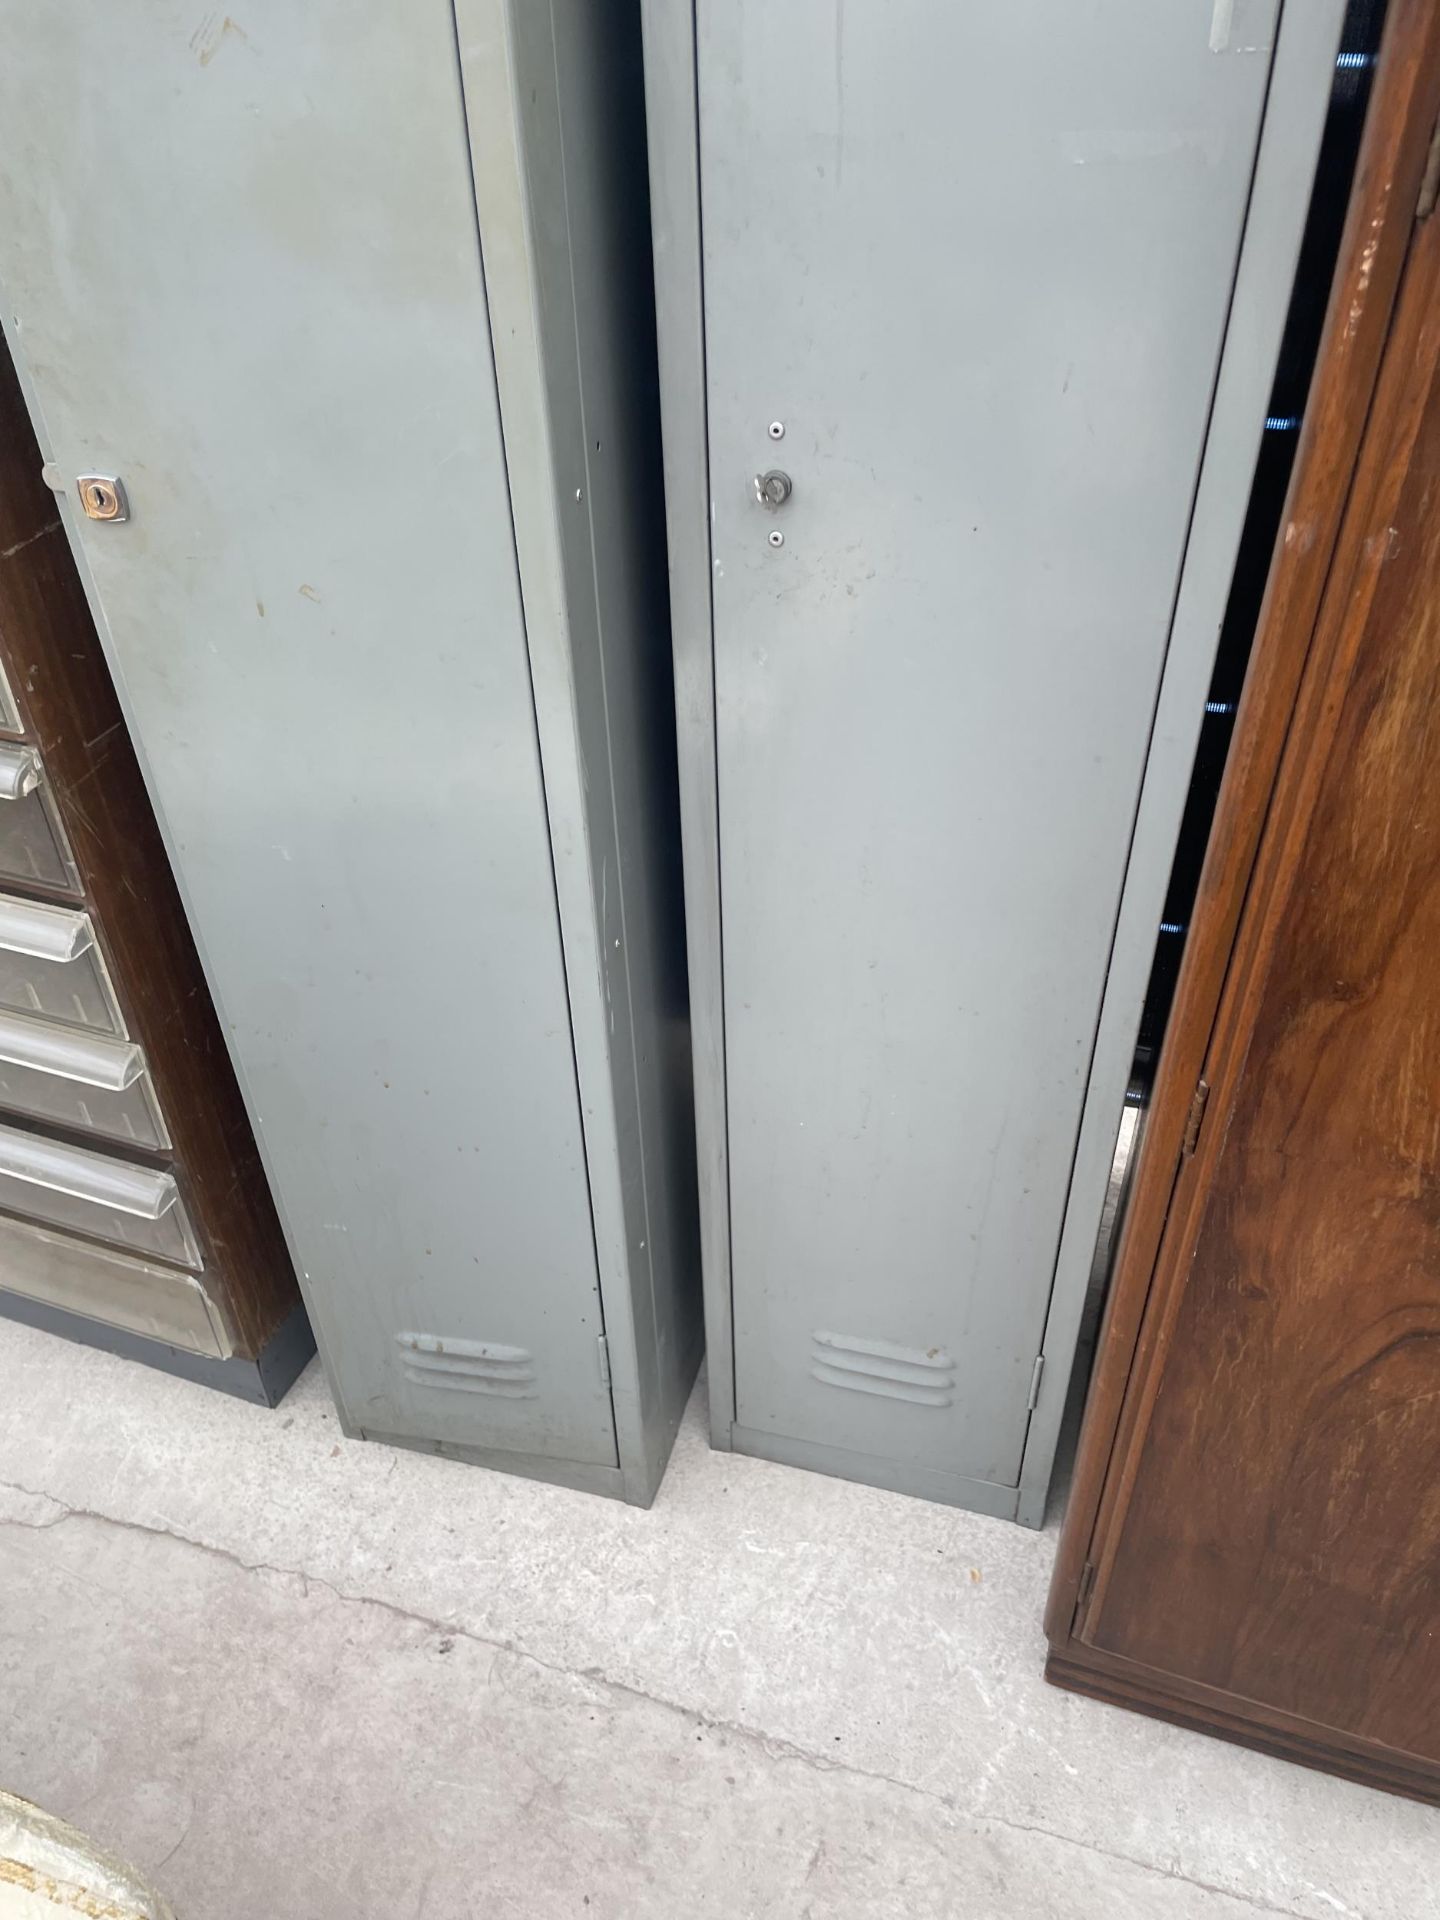 TWO 'LION STEEL' METAL LOCKERS, 12" WIDE, ONE MARKED U.M.I.S.T - Image 3 of 3